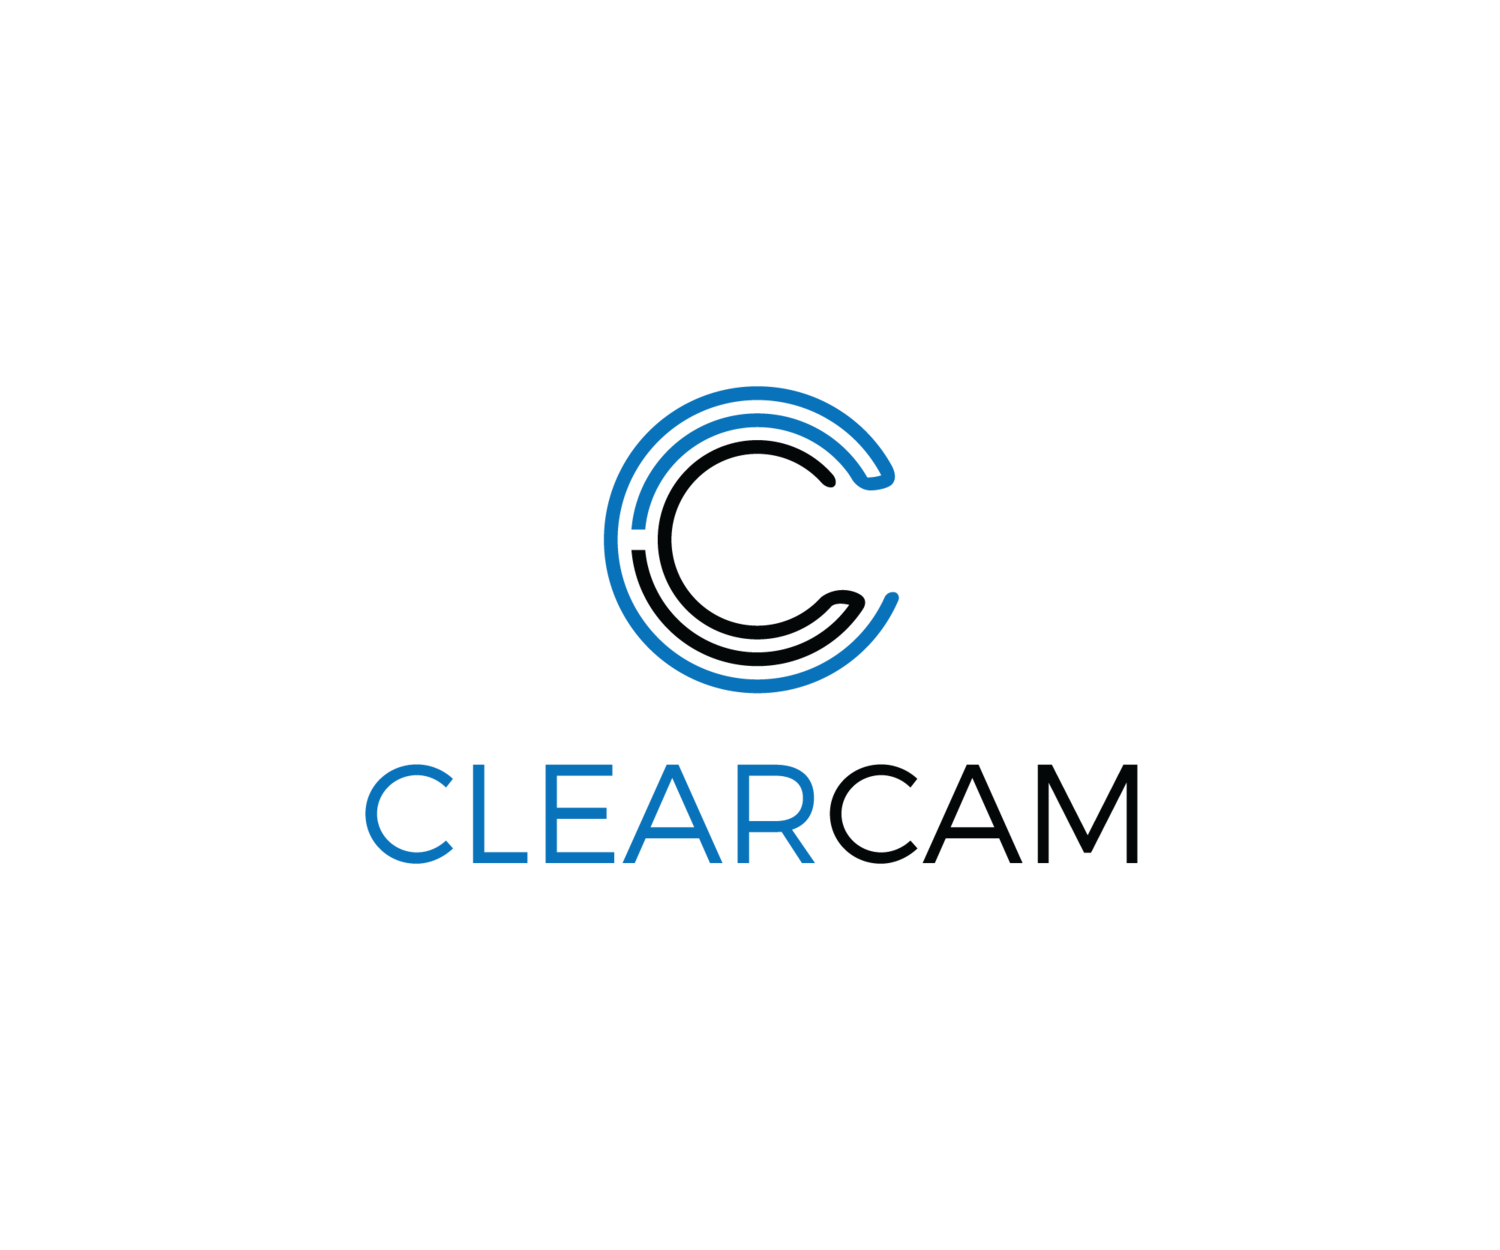 Clearcam